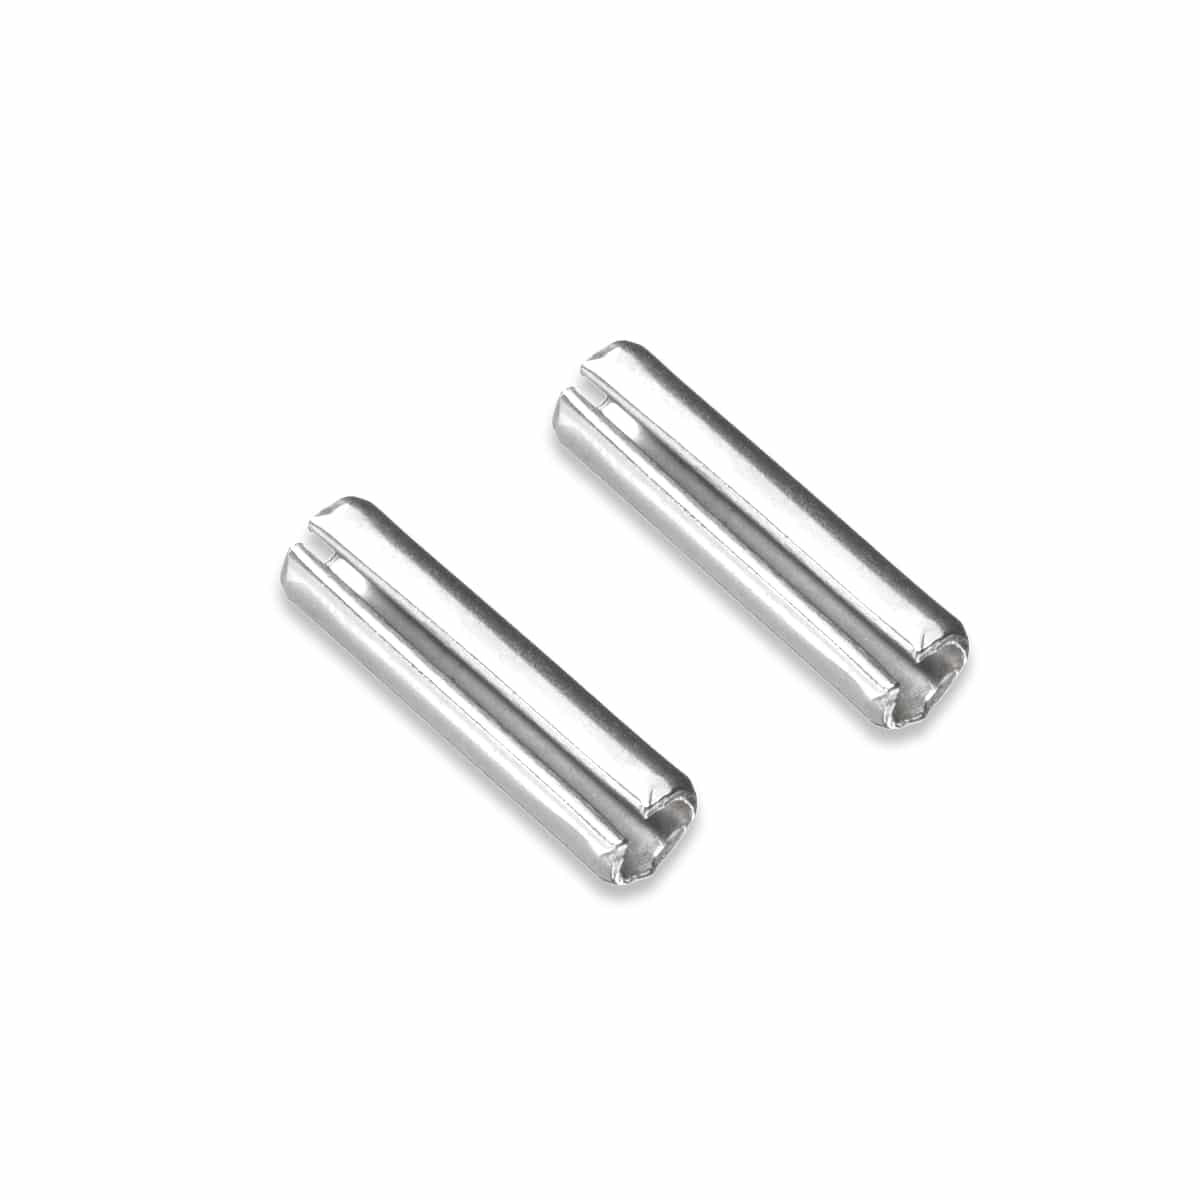 Fortis Low Profile Gas Block - Stainless Steel